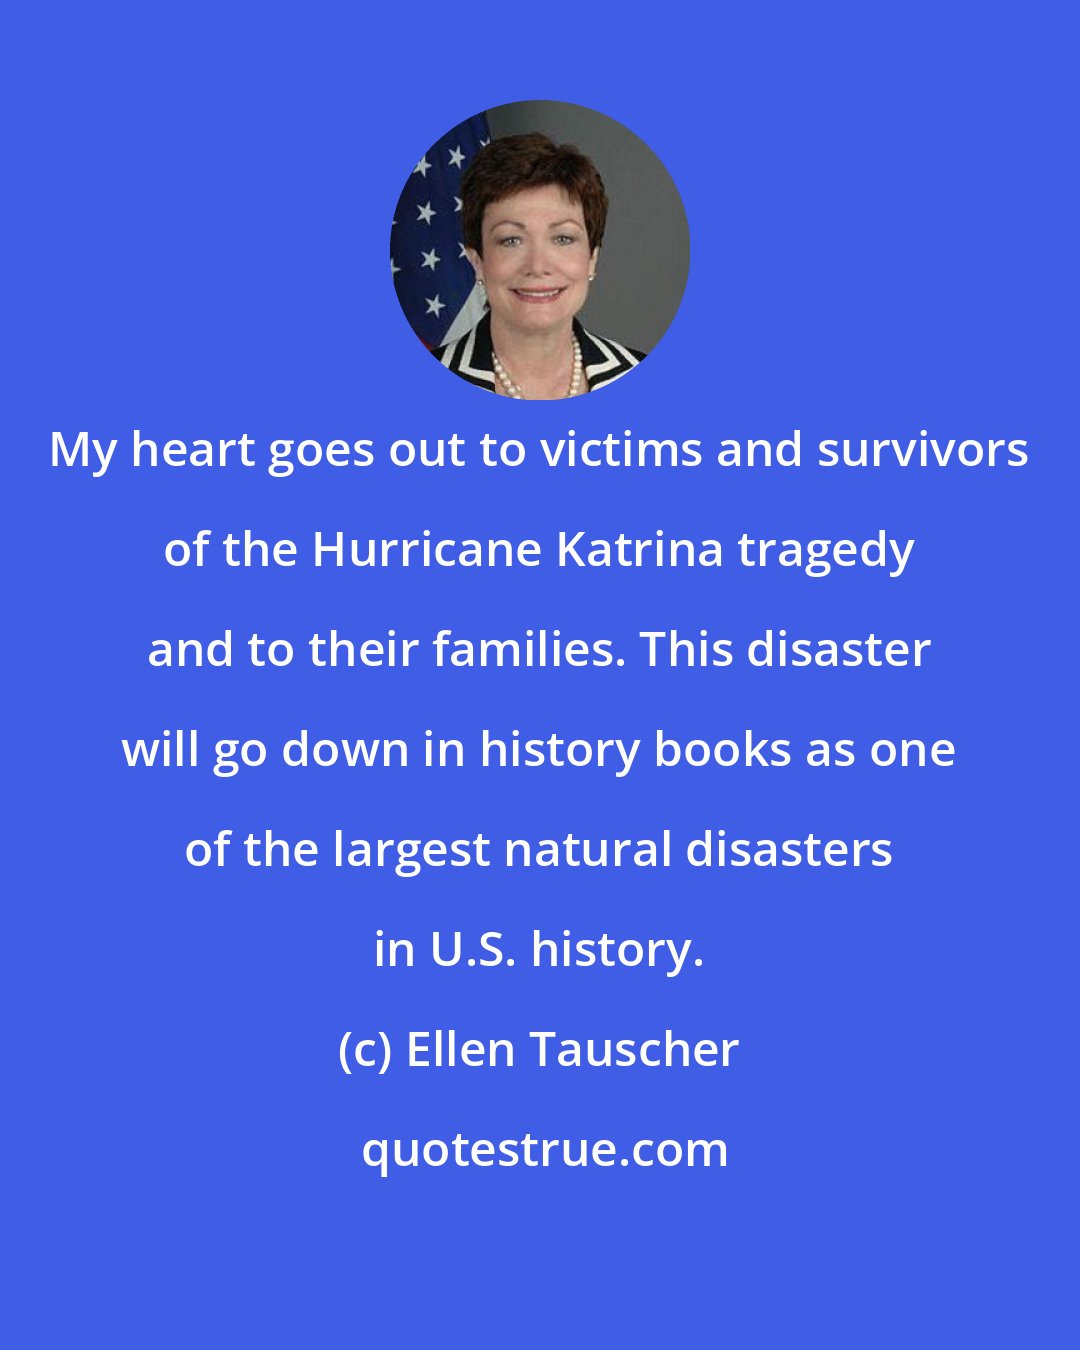 Ellen Tauscher: My heart goes out to victims and survivors of the Hurricane Katrina tragedy and to their families. This disaster will go down in history books as one of the largest natural disasters in U.S. history.